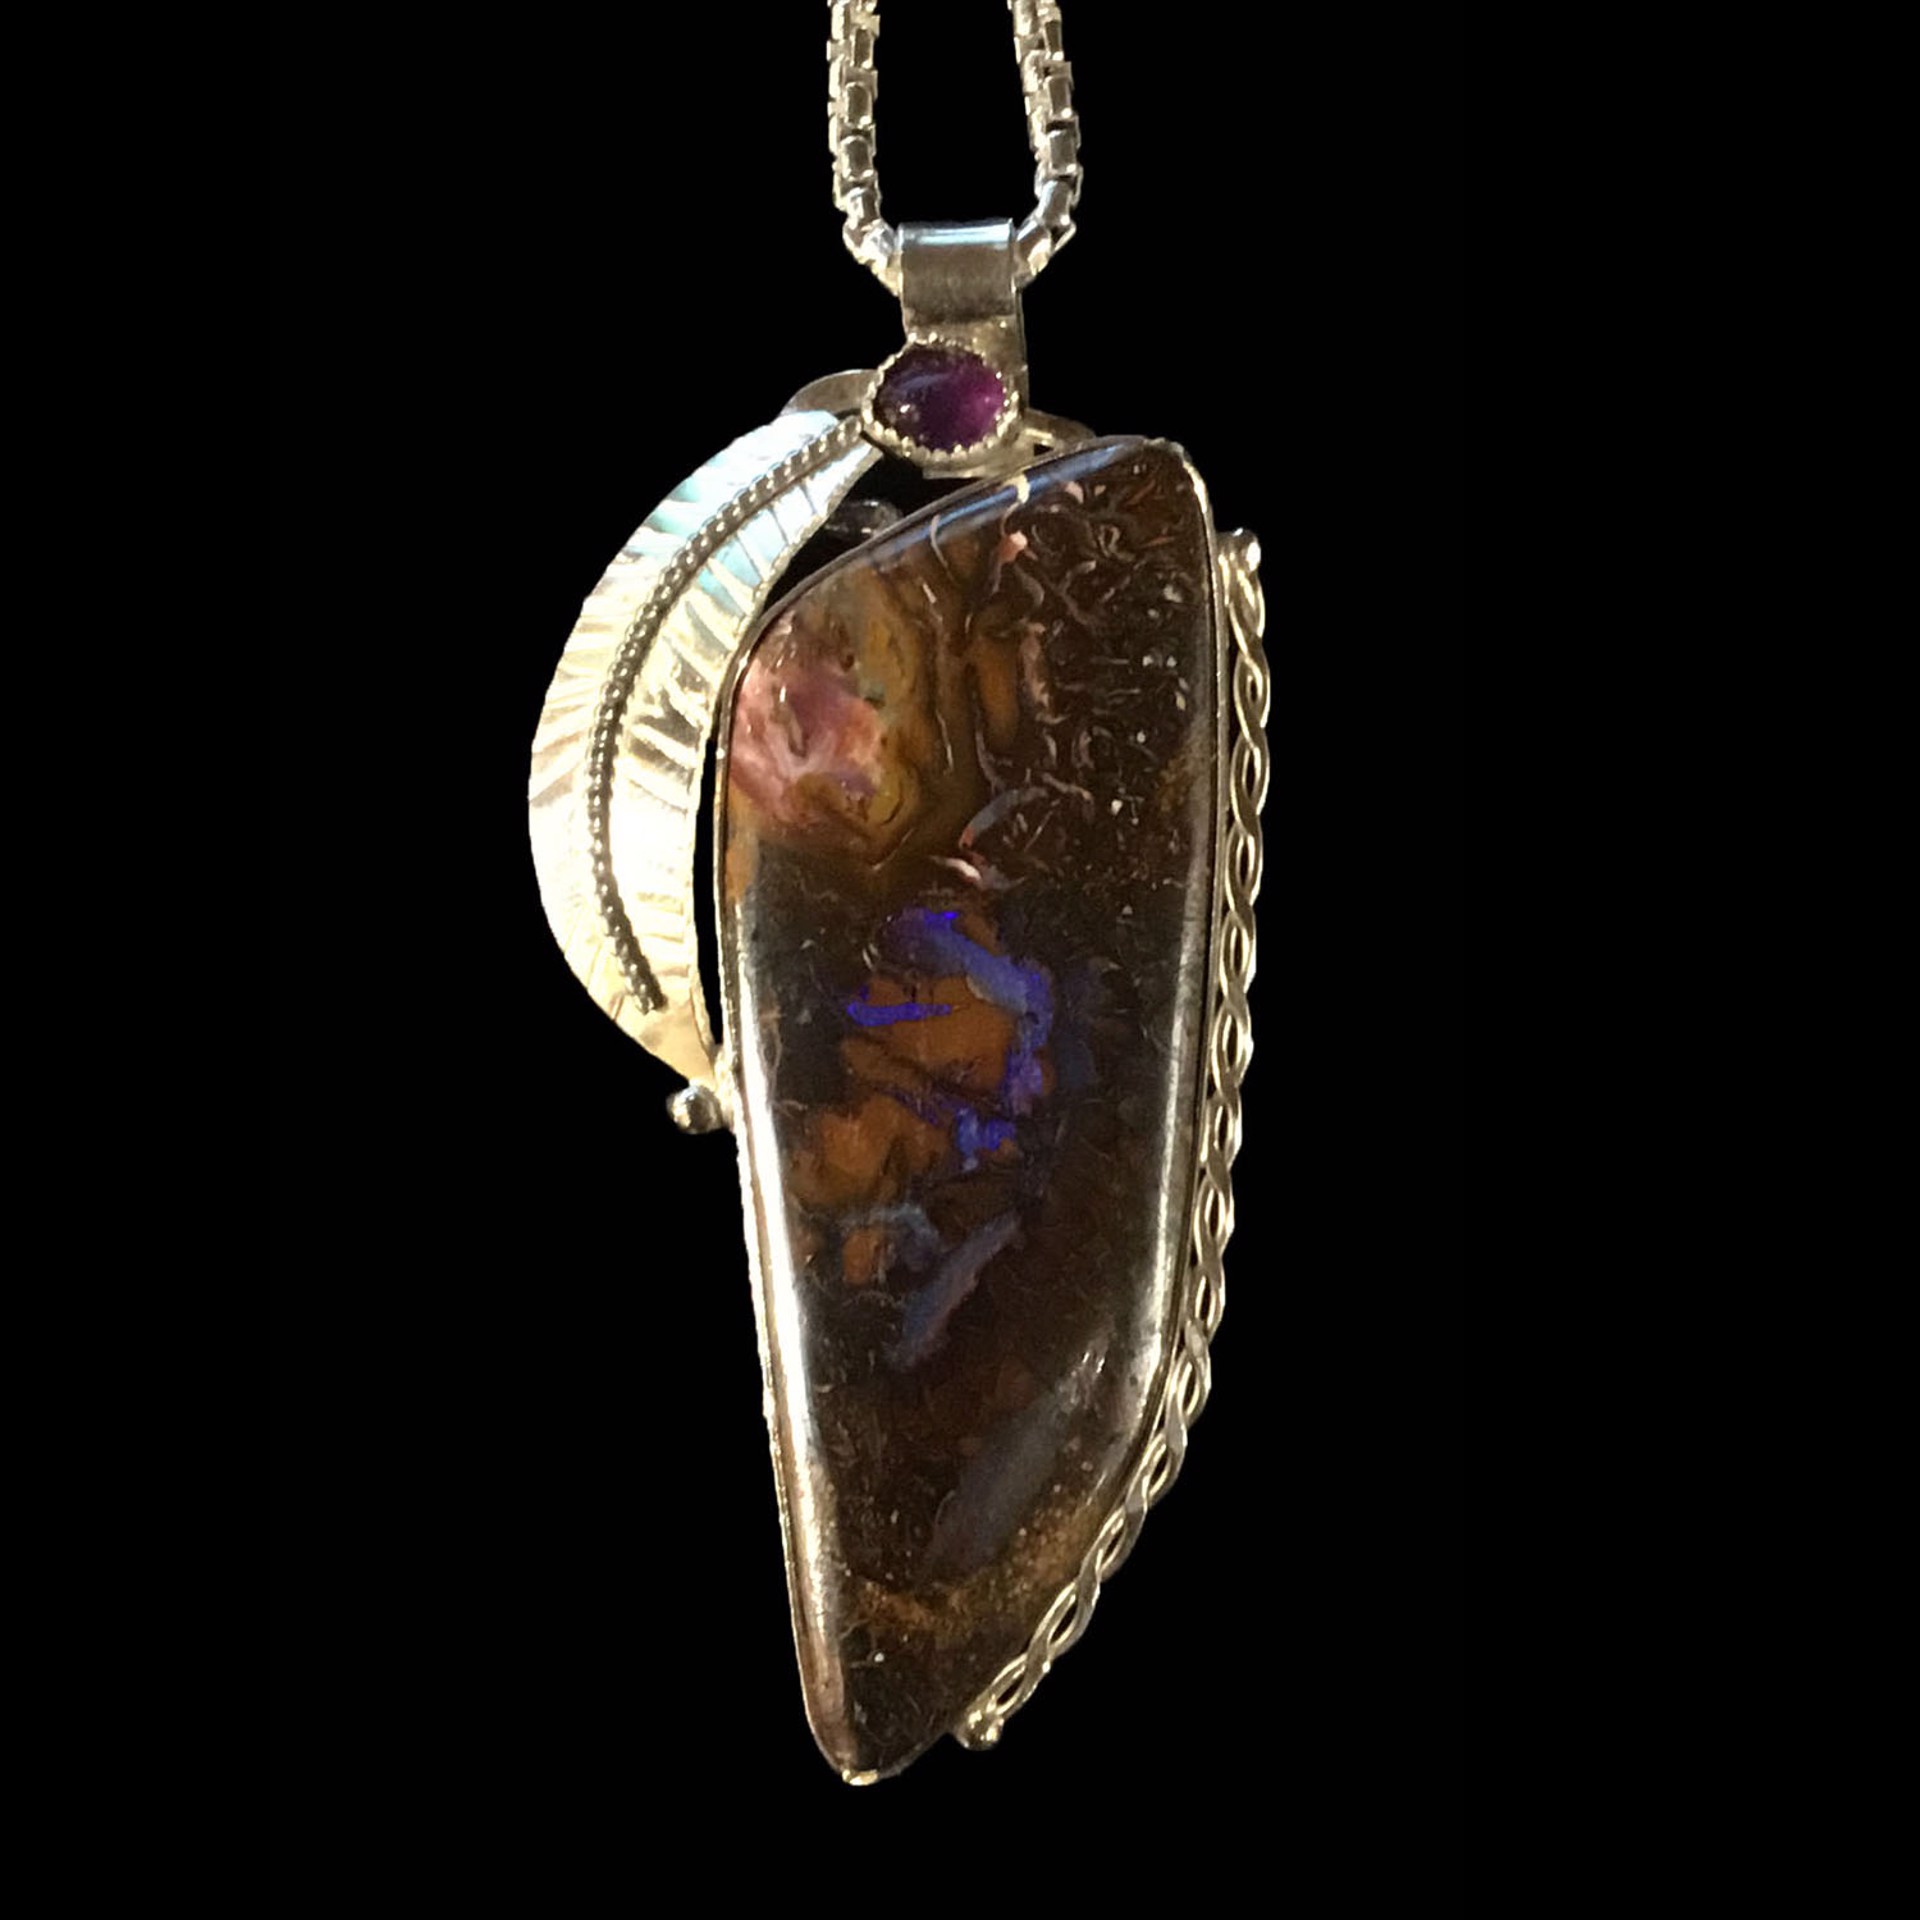 Boulder Opal with 24" Sterling Silver Necklace by Michael Redhawk